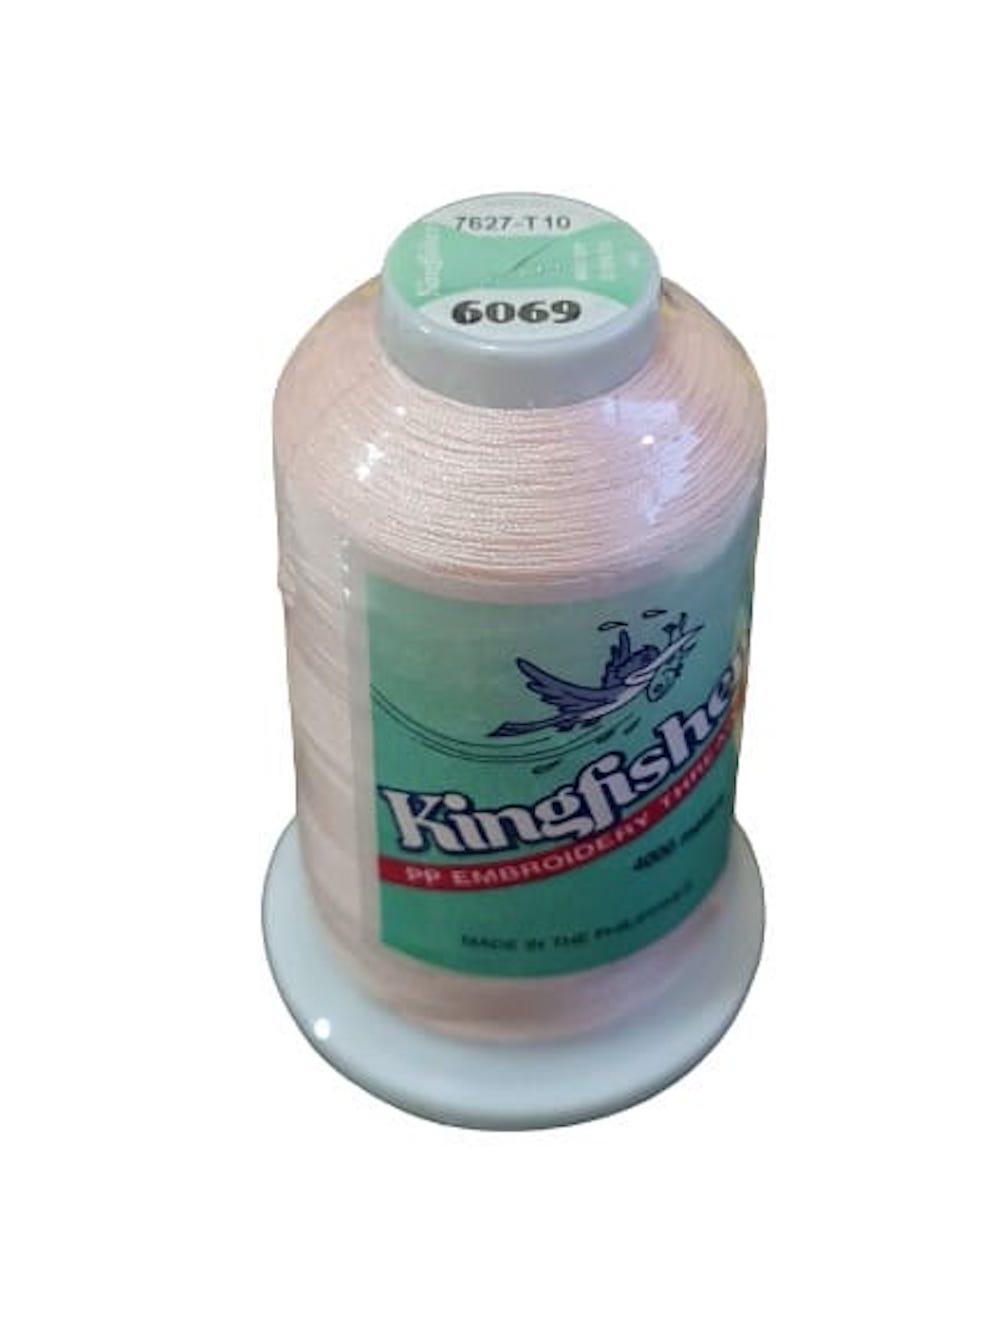 King Fisher Embroidery Thread 4000m 6069 - MY SEWING MALL